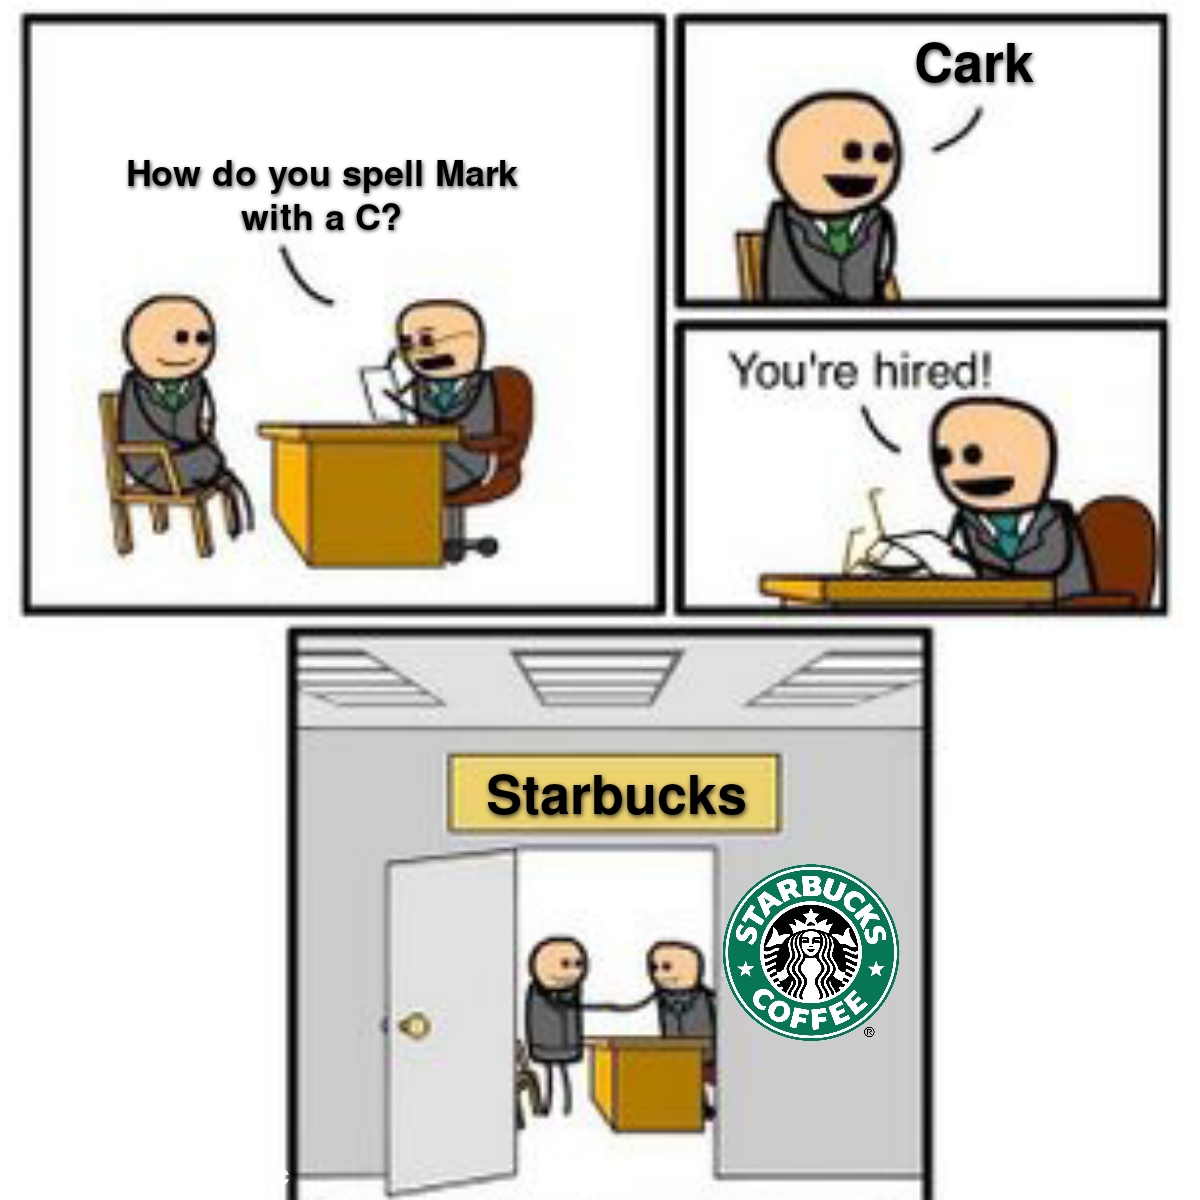 dank memes - funny memes - How do you spell Mark with a C? You're hired! Starbucks Star Jcks Cark Coffee